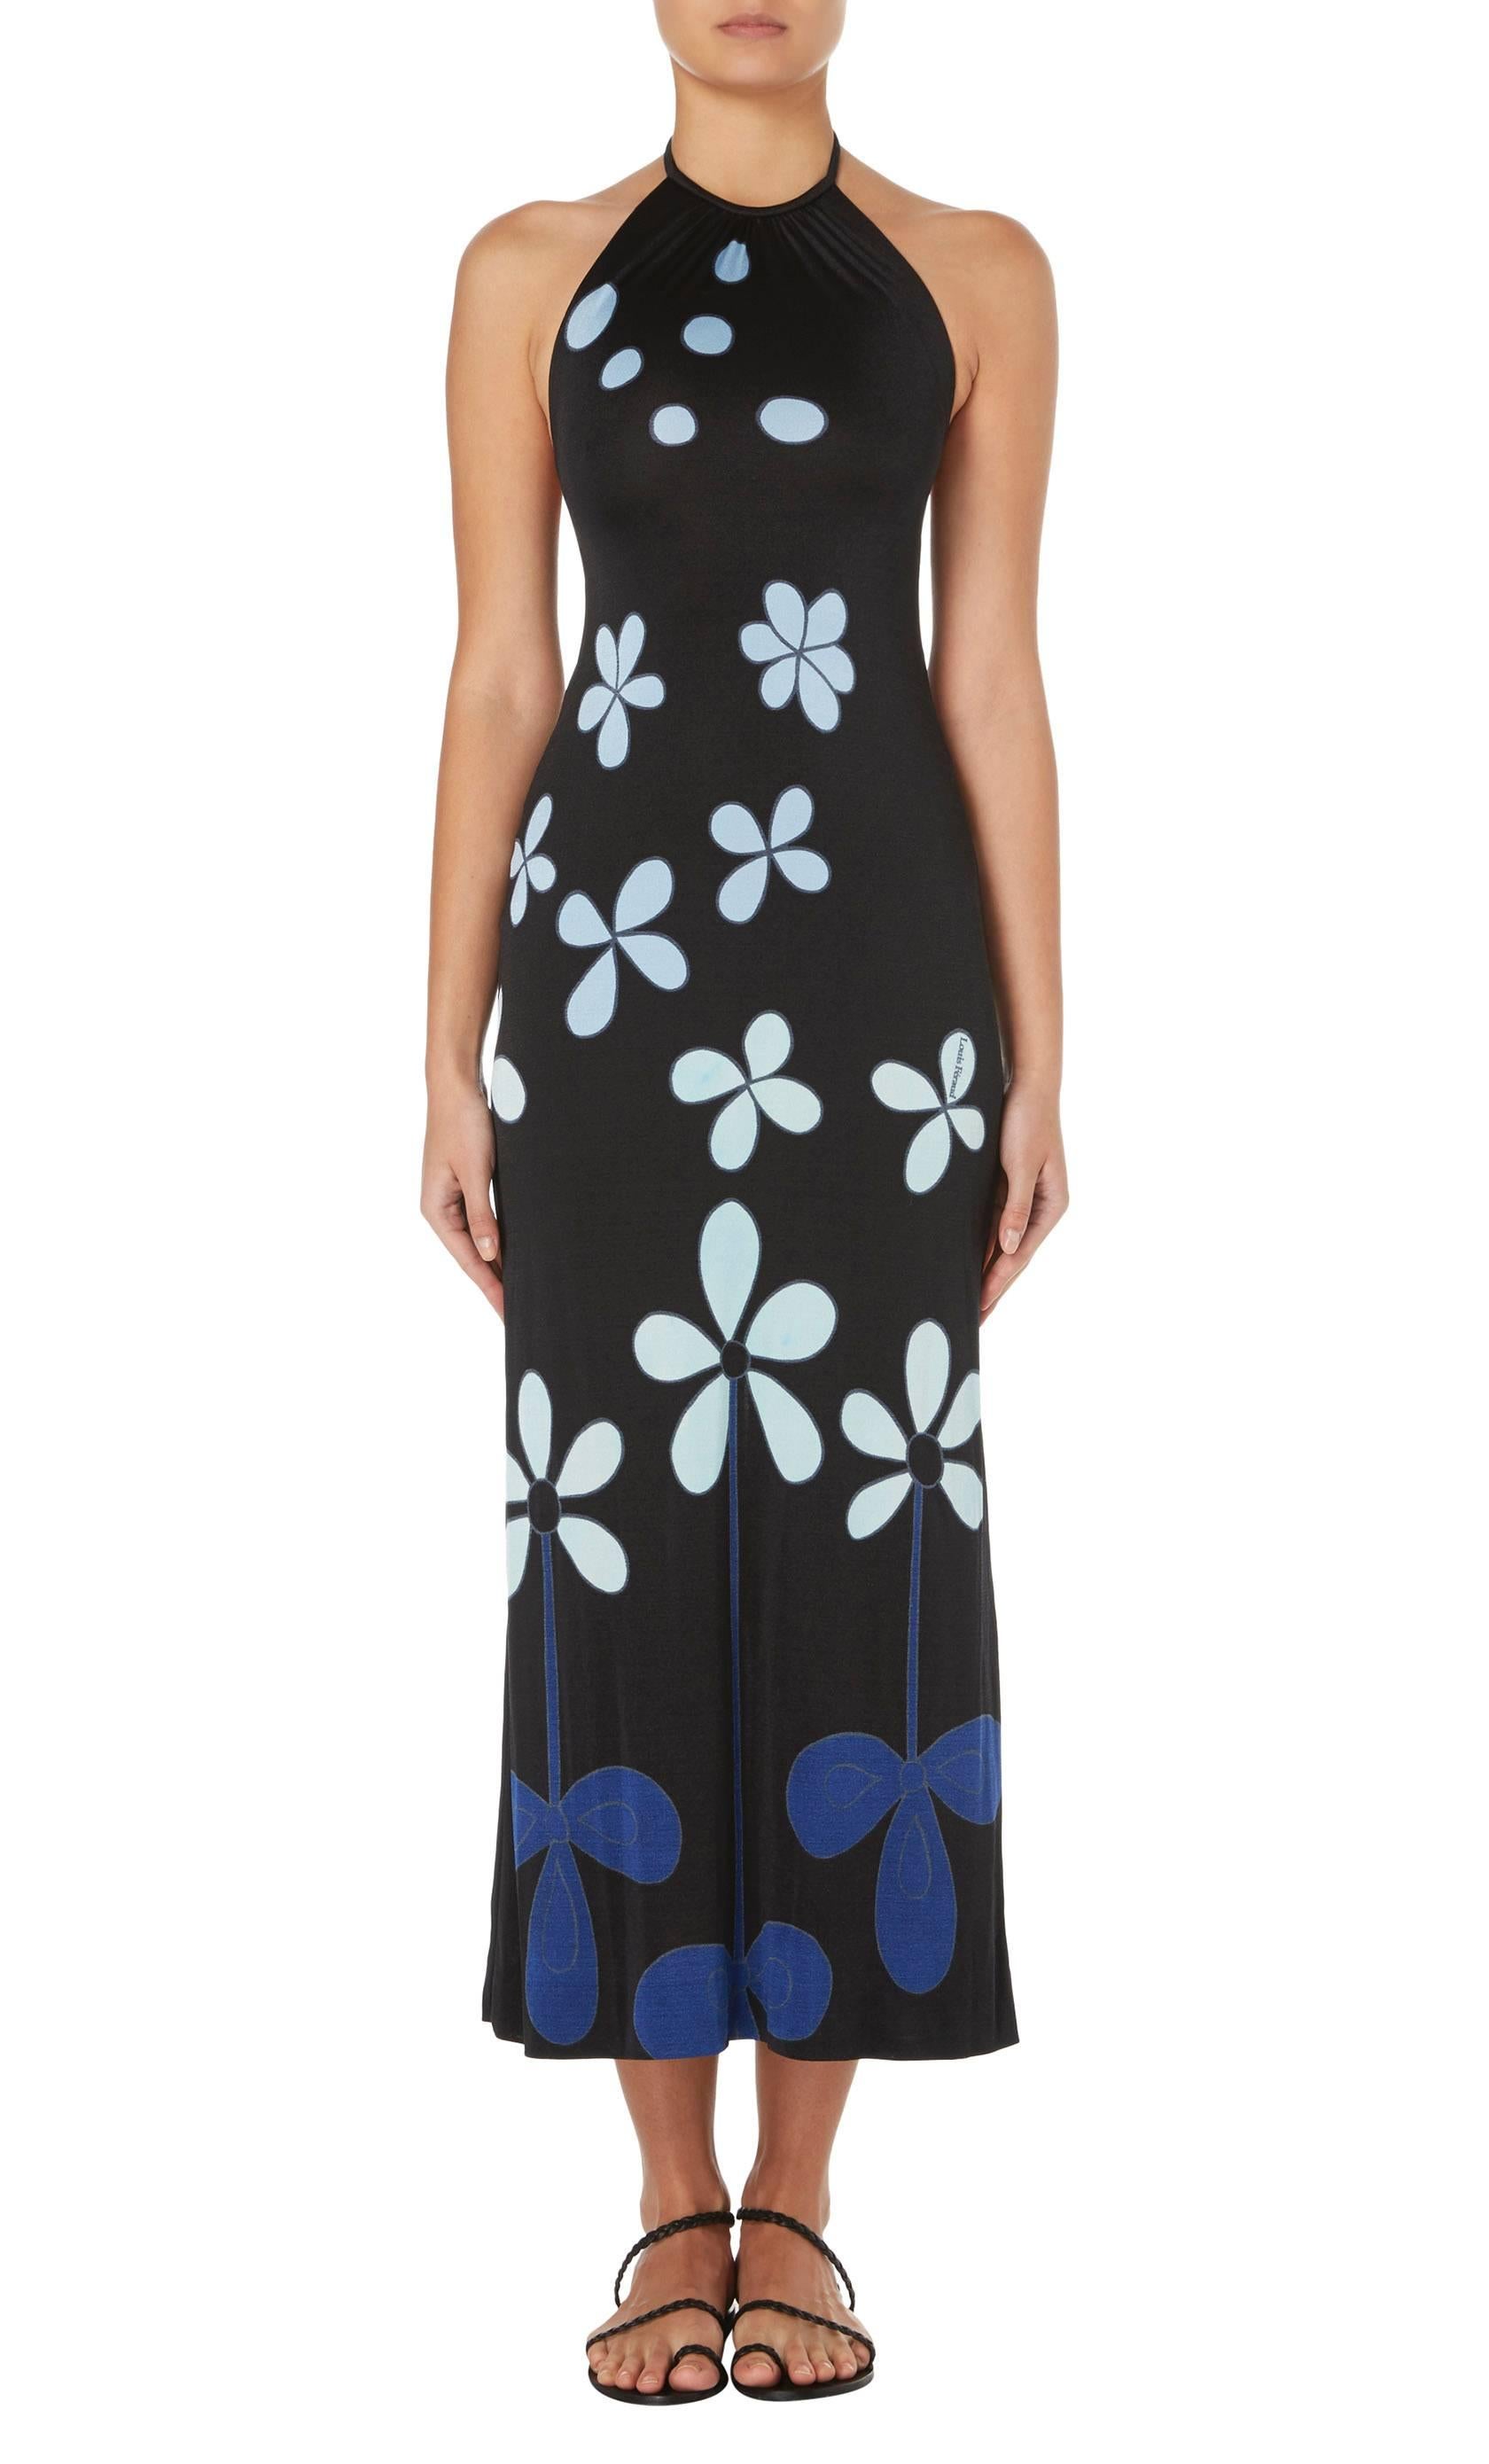 Ideal for hot summer days, this Louis Féraud halterneck dress is light and airy and will look fantastic worn on the beach or by the pool. Constructed in black manmade jersey and printed with overscale flowers in shades of blue, the dress has a low